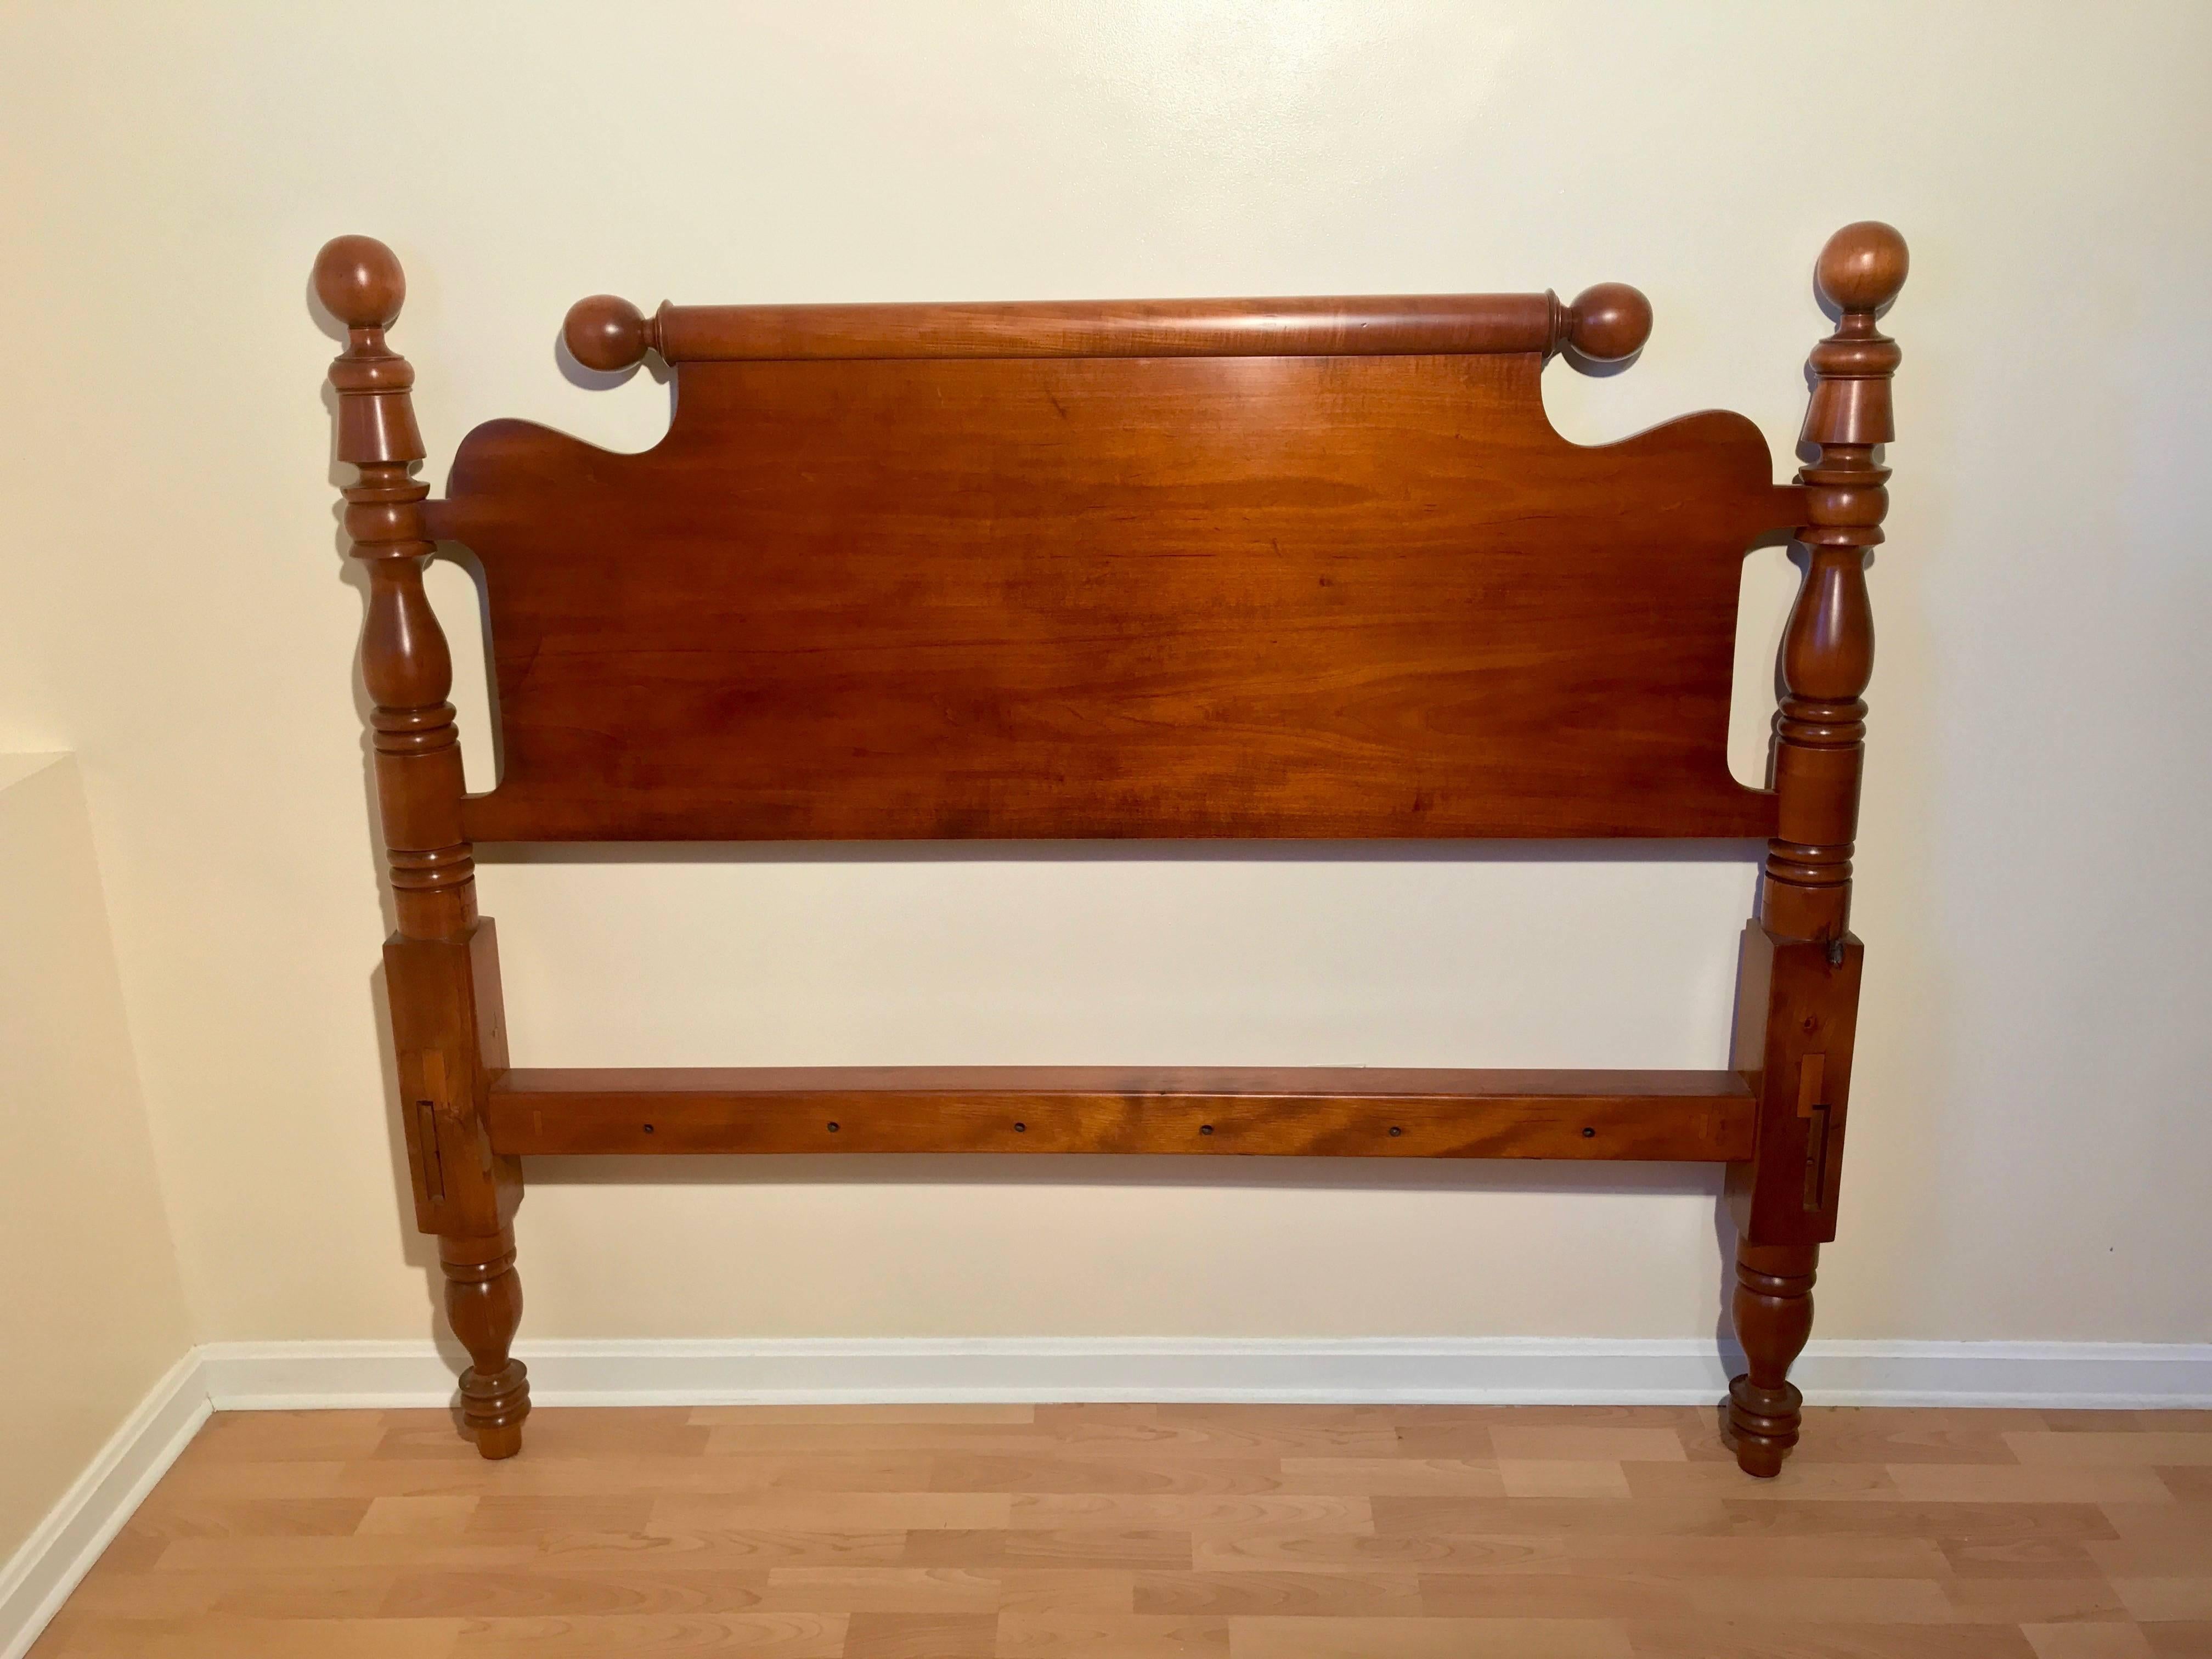 Cannonball and bell lowpost in maple circa 1840 refitted to standard queen with roll top repeat end headboard. Provenance: New Hampshire. Antique 3 x 3 rope hole cross rails, 1 x 7 side rails. Traditional maple finish.

- All beds come with bolts,